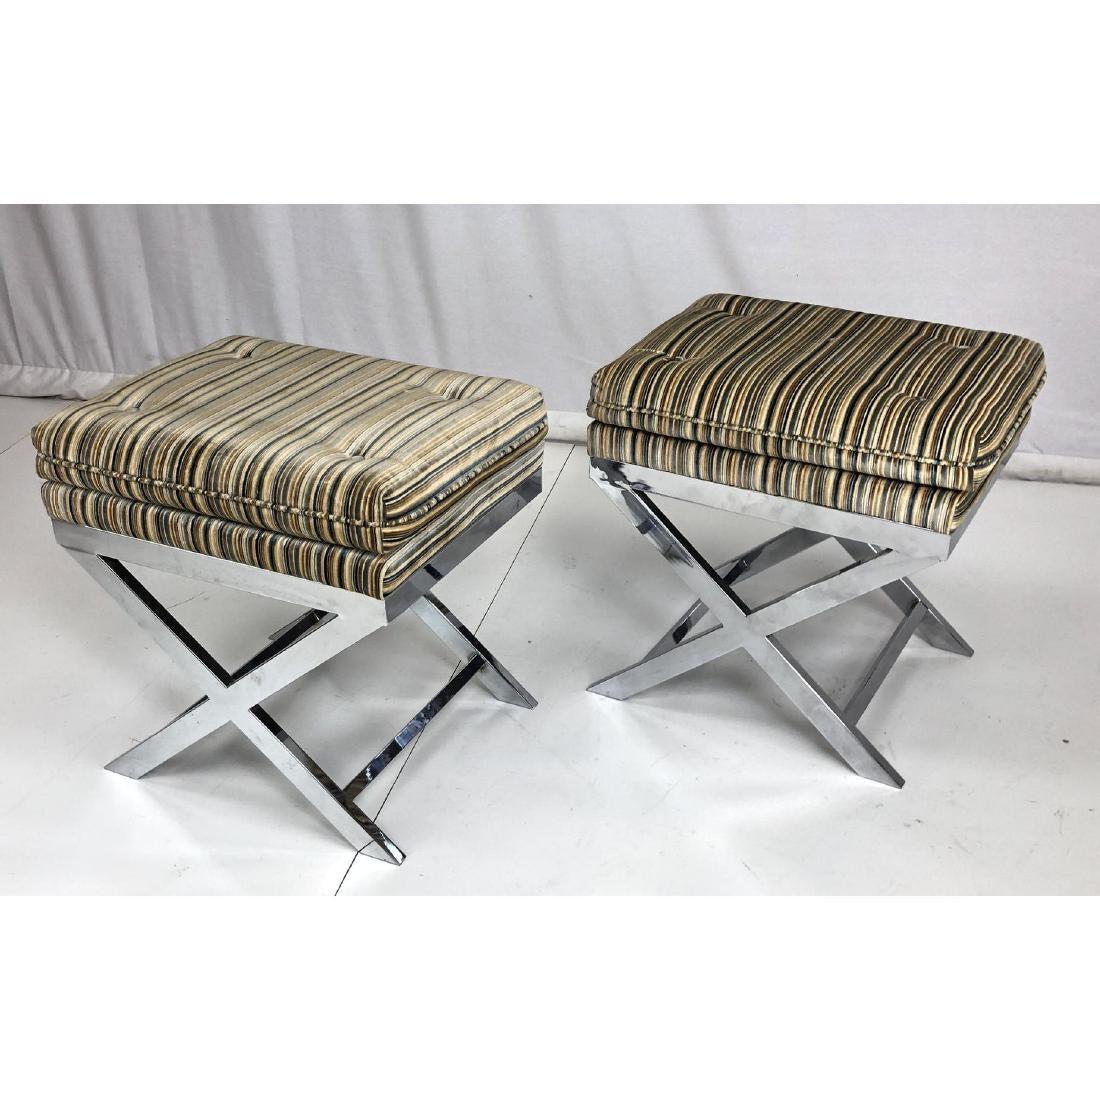 Pair of Paul Evans style Hollywood Regency style decorator chrome based X form stools or benches each in a new stripped upholstery.